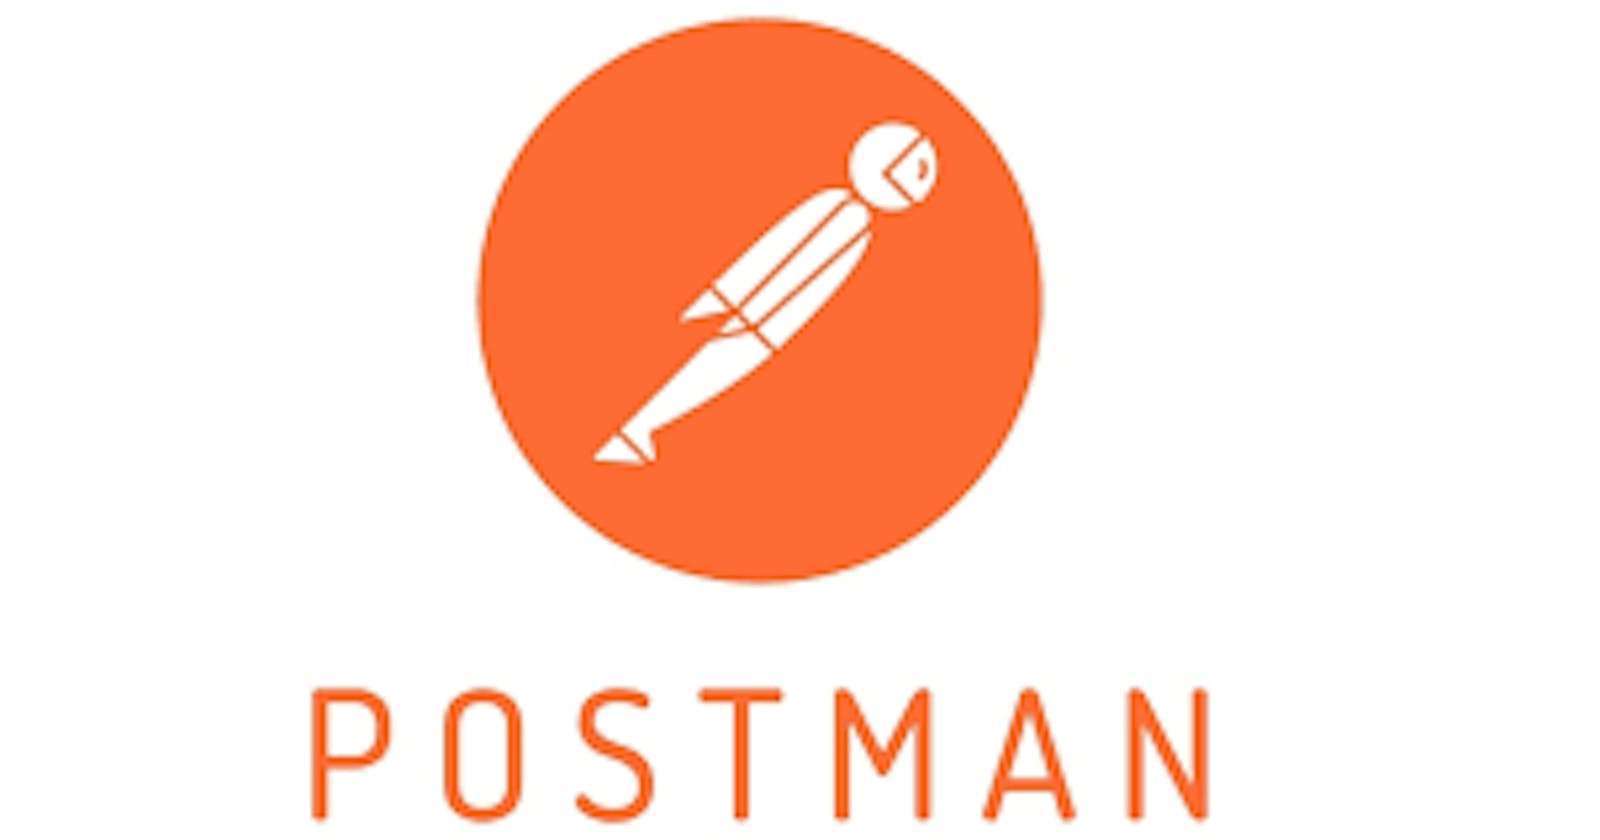 Getting started with postman - Writing your first test